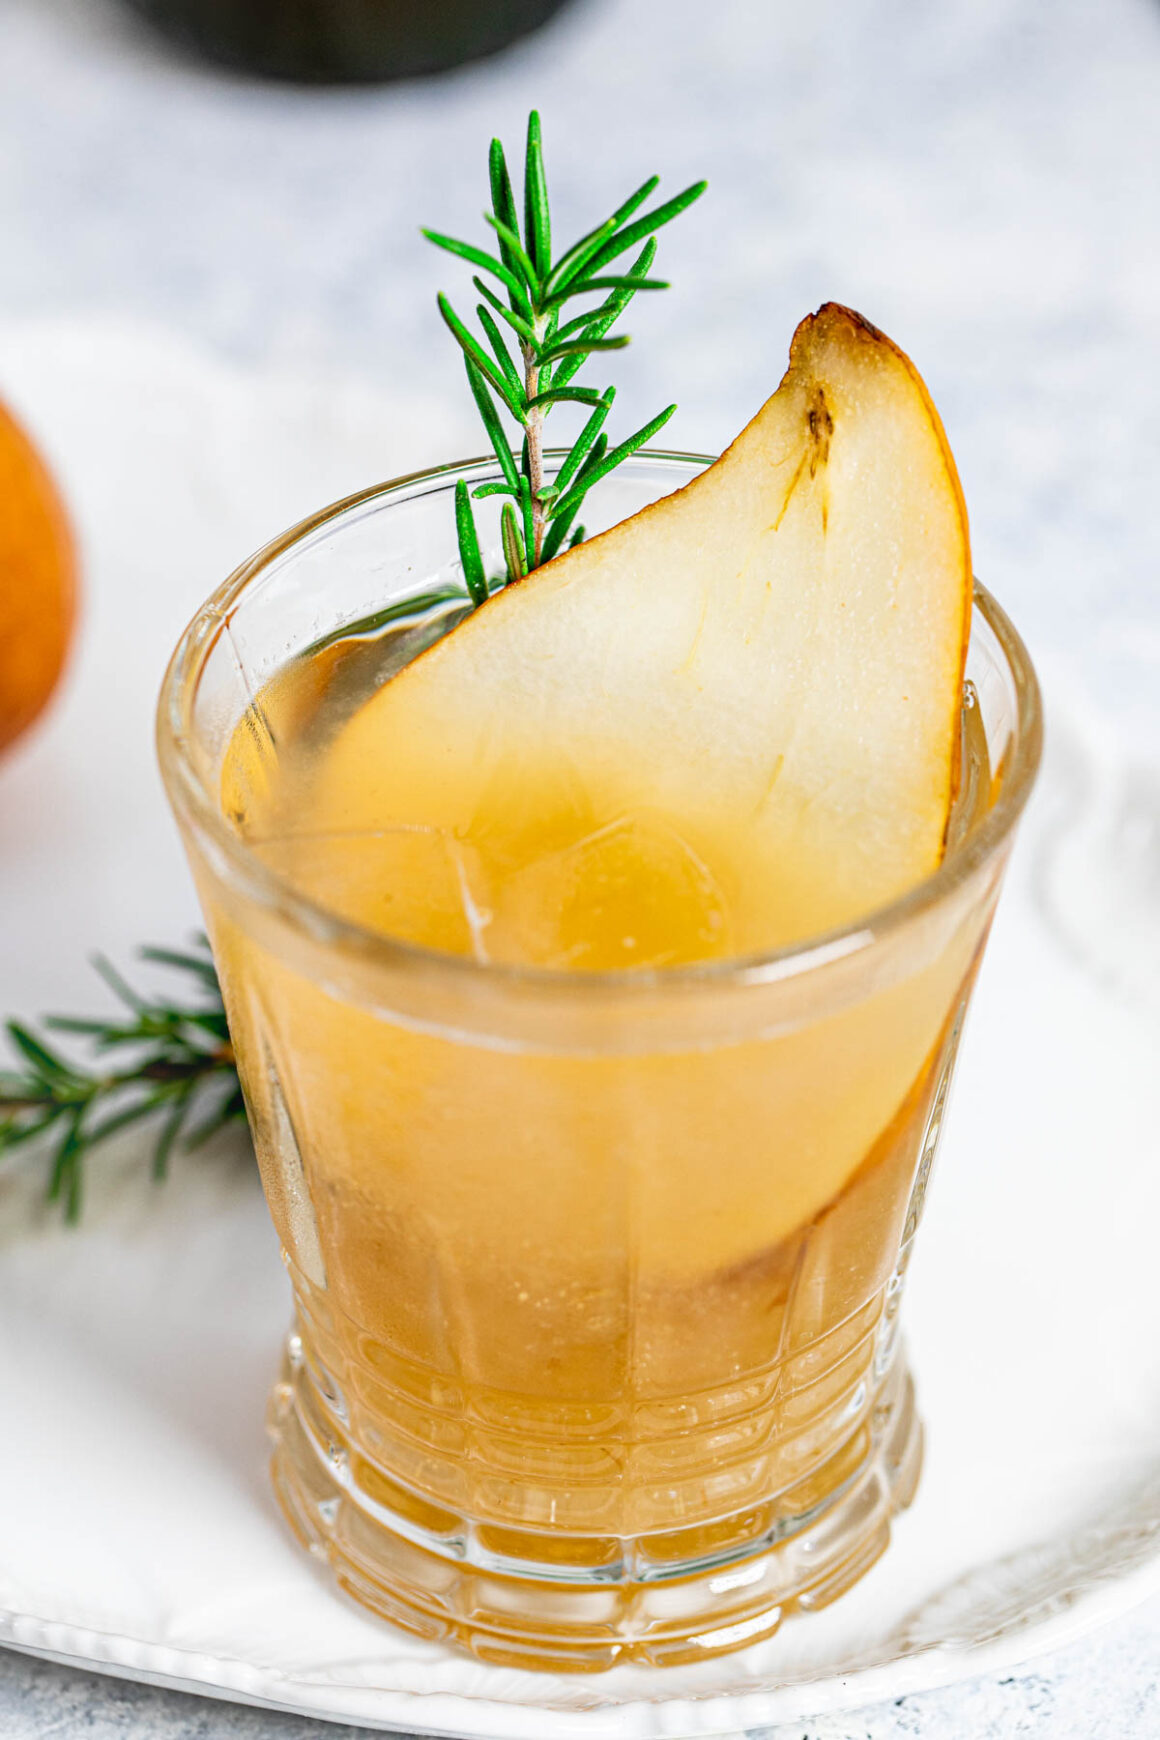 This cocktail is a delicious blend of sweet pear flavors and the botanical complexities of gin.